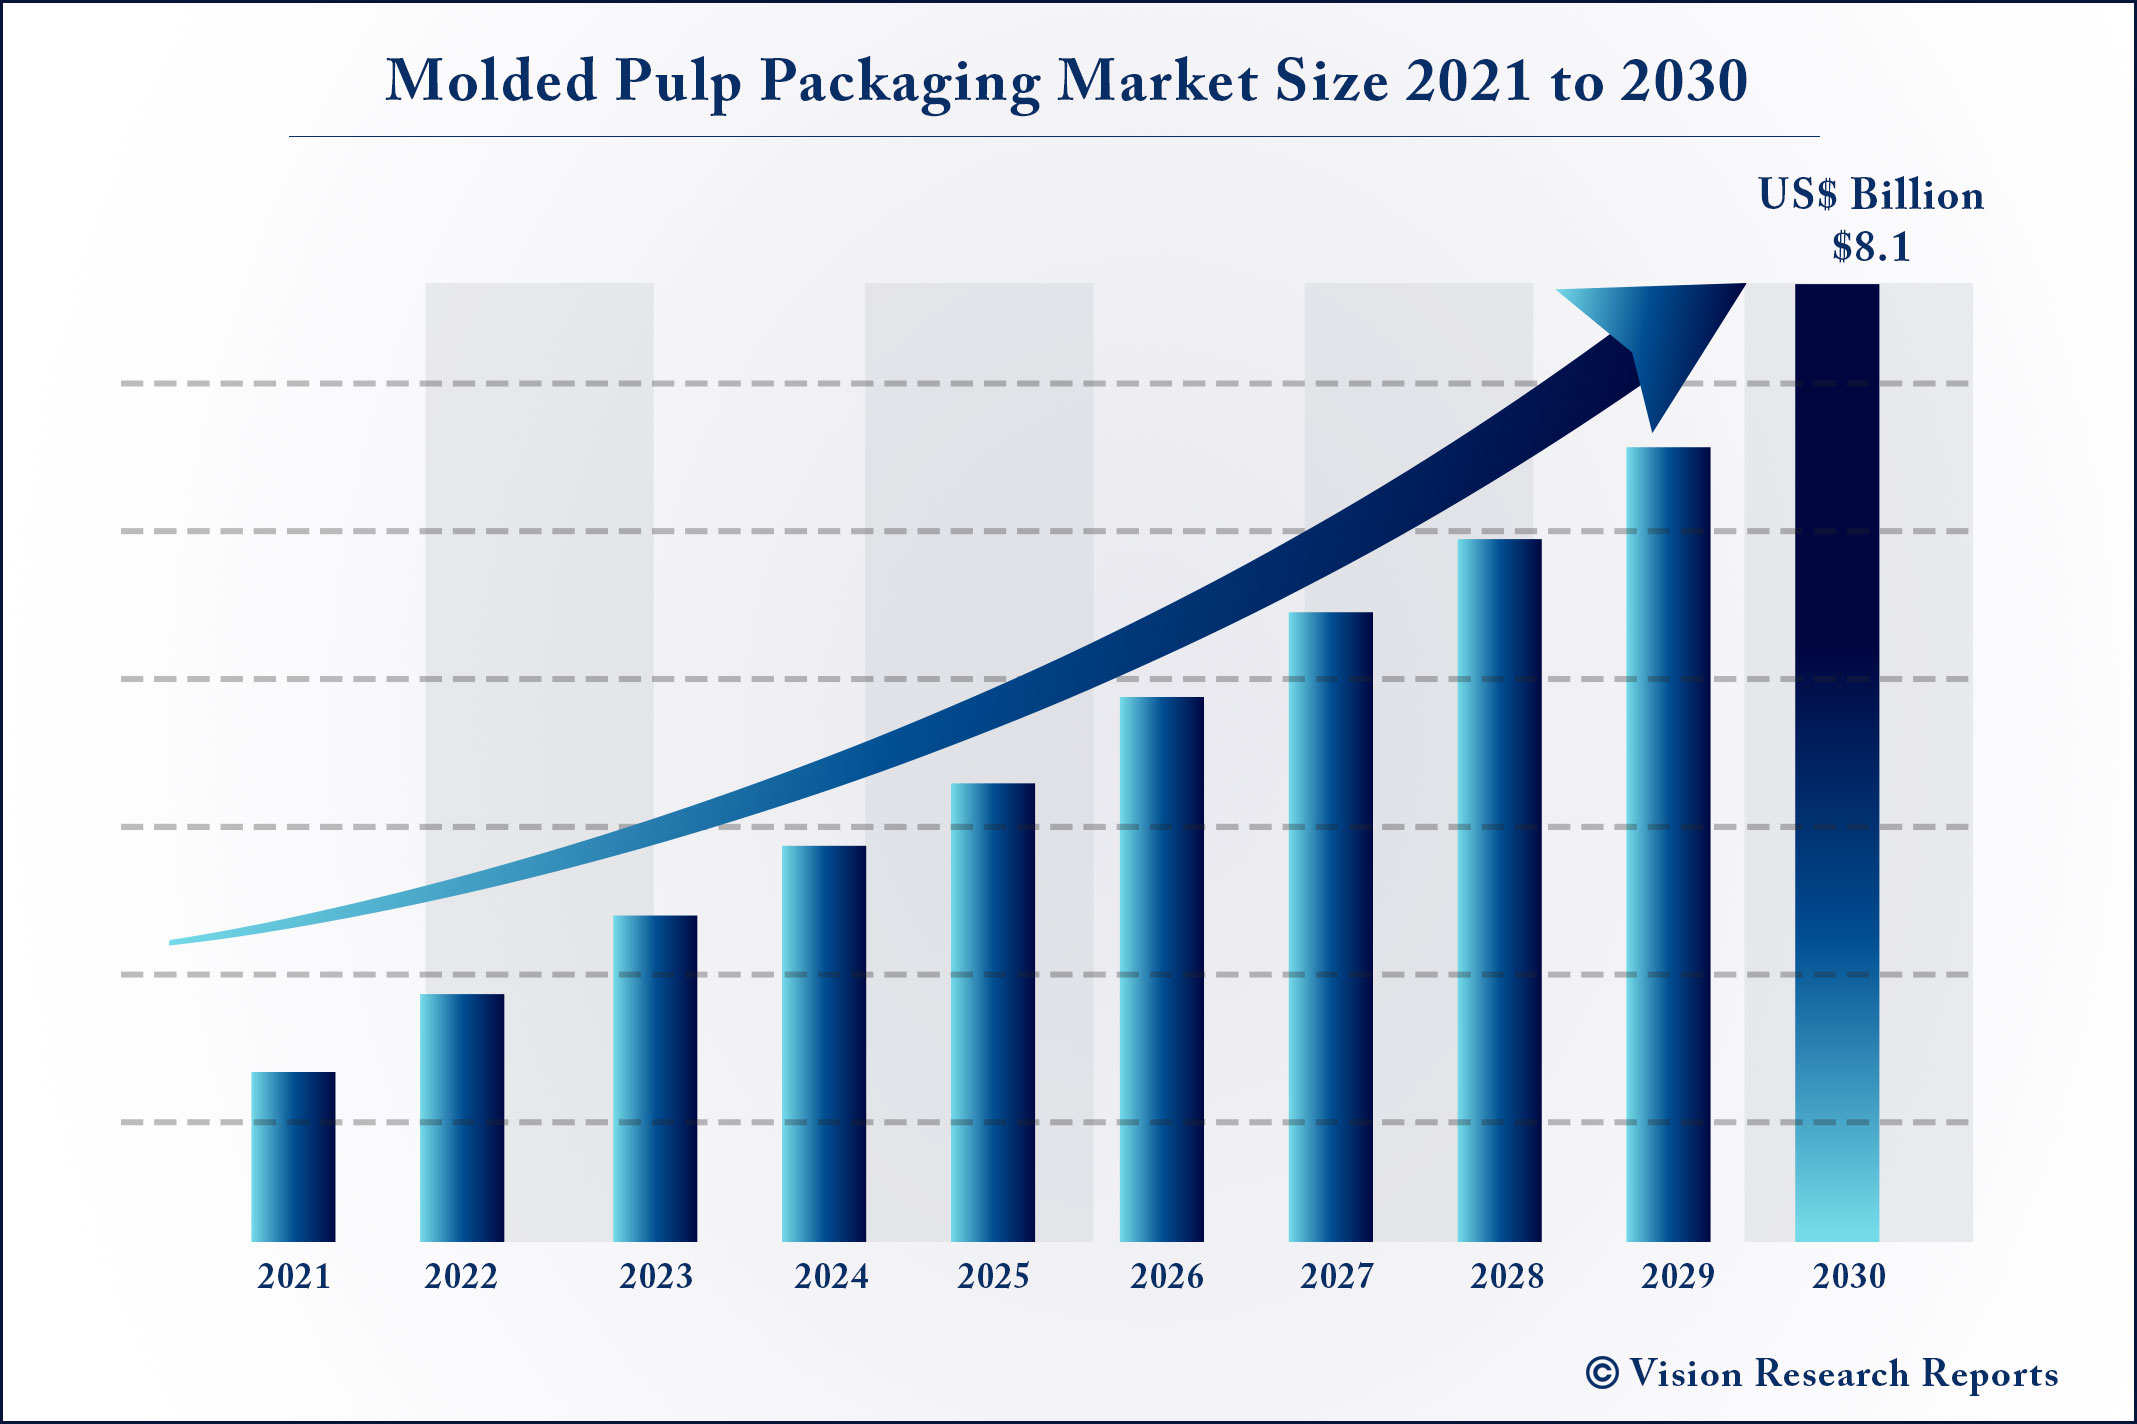 Molded Pulp Packaging Market Size 2021 to 2030